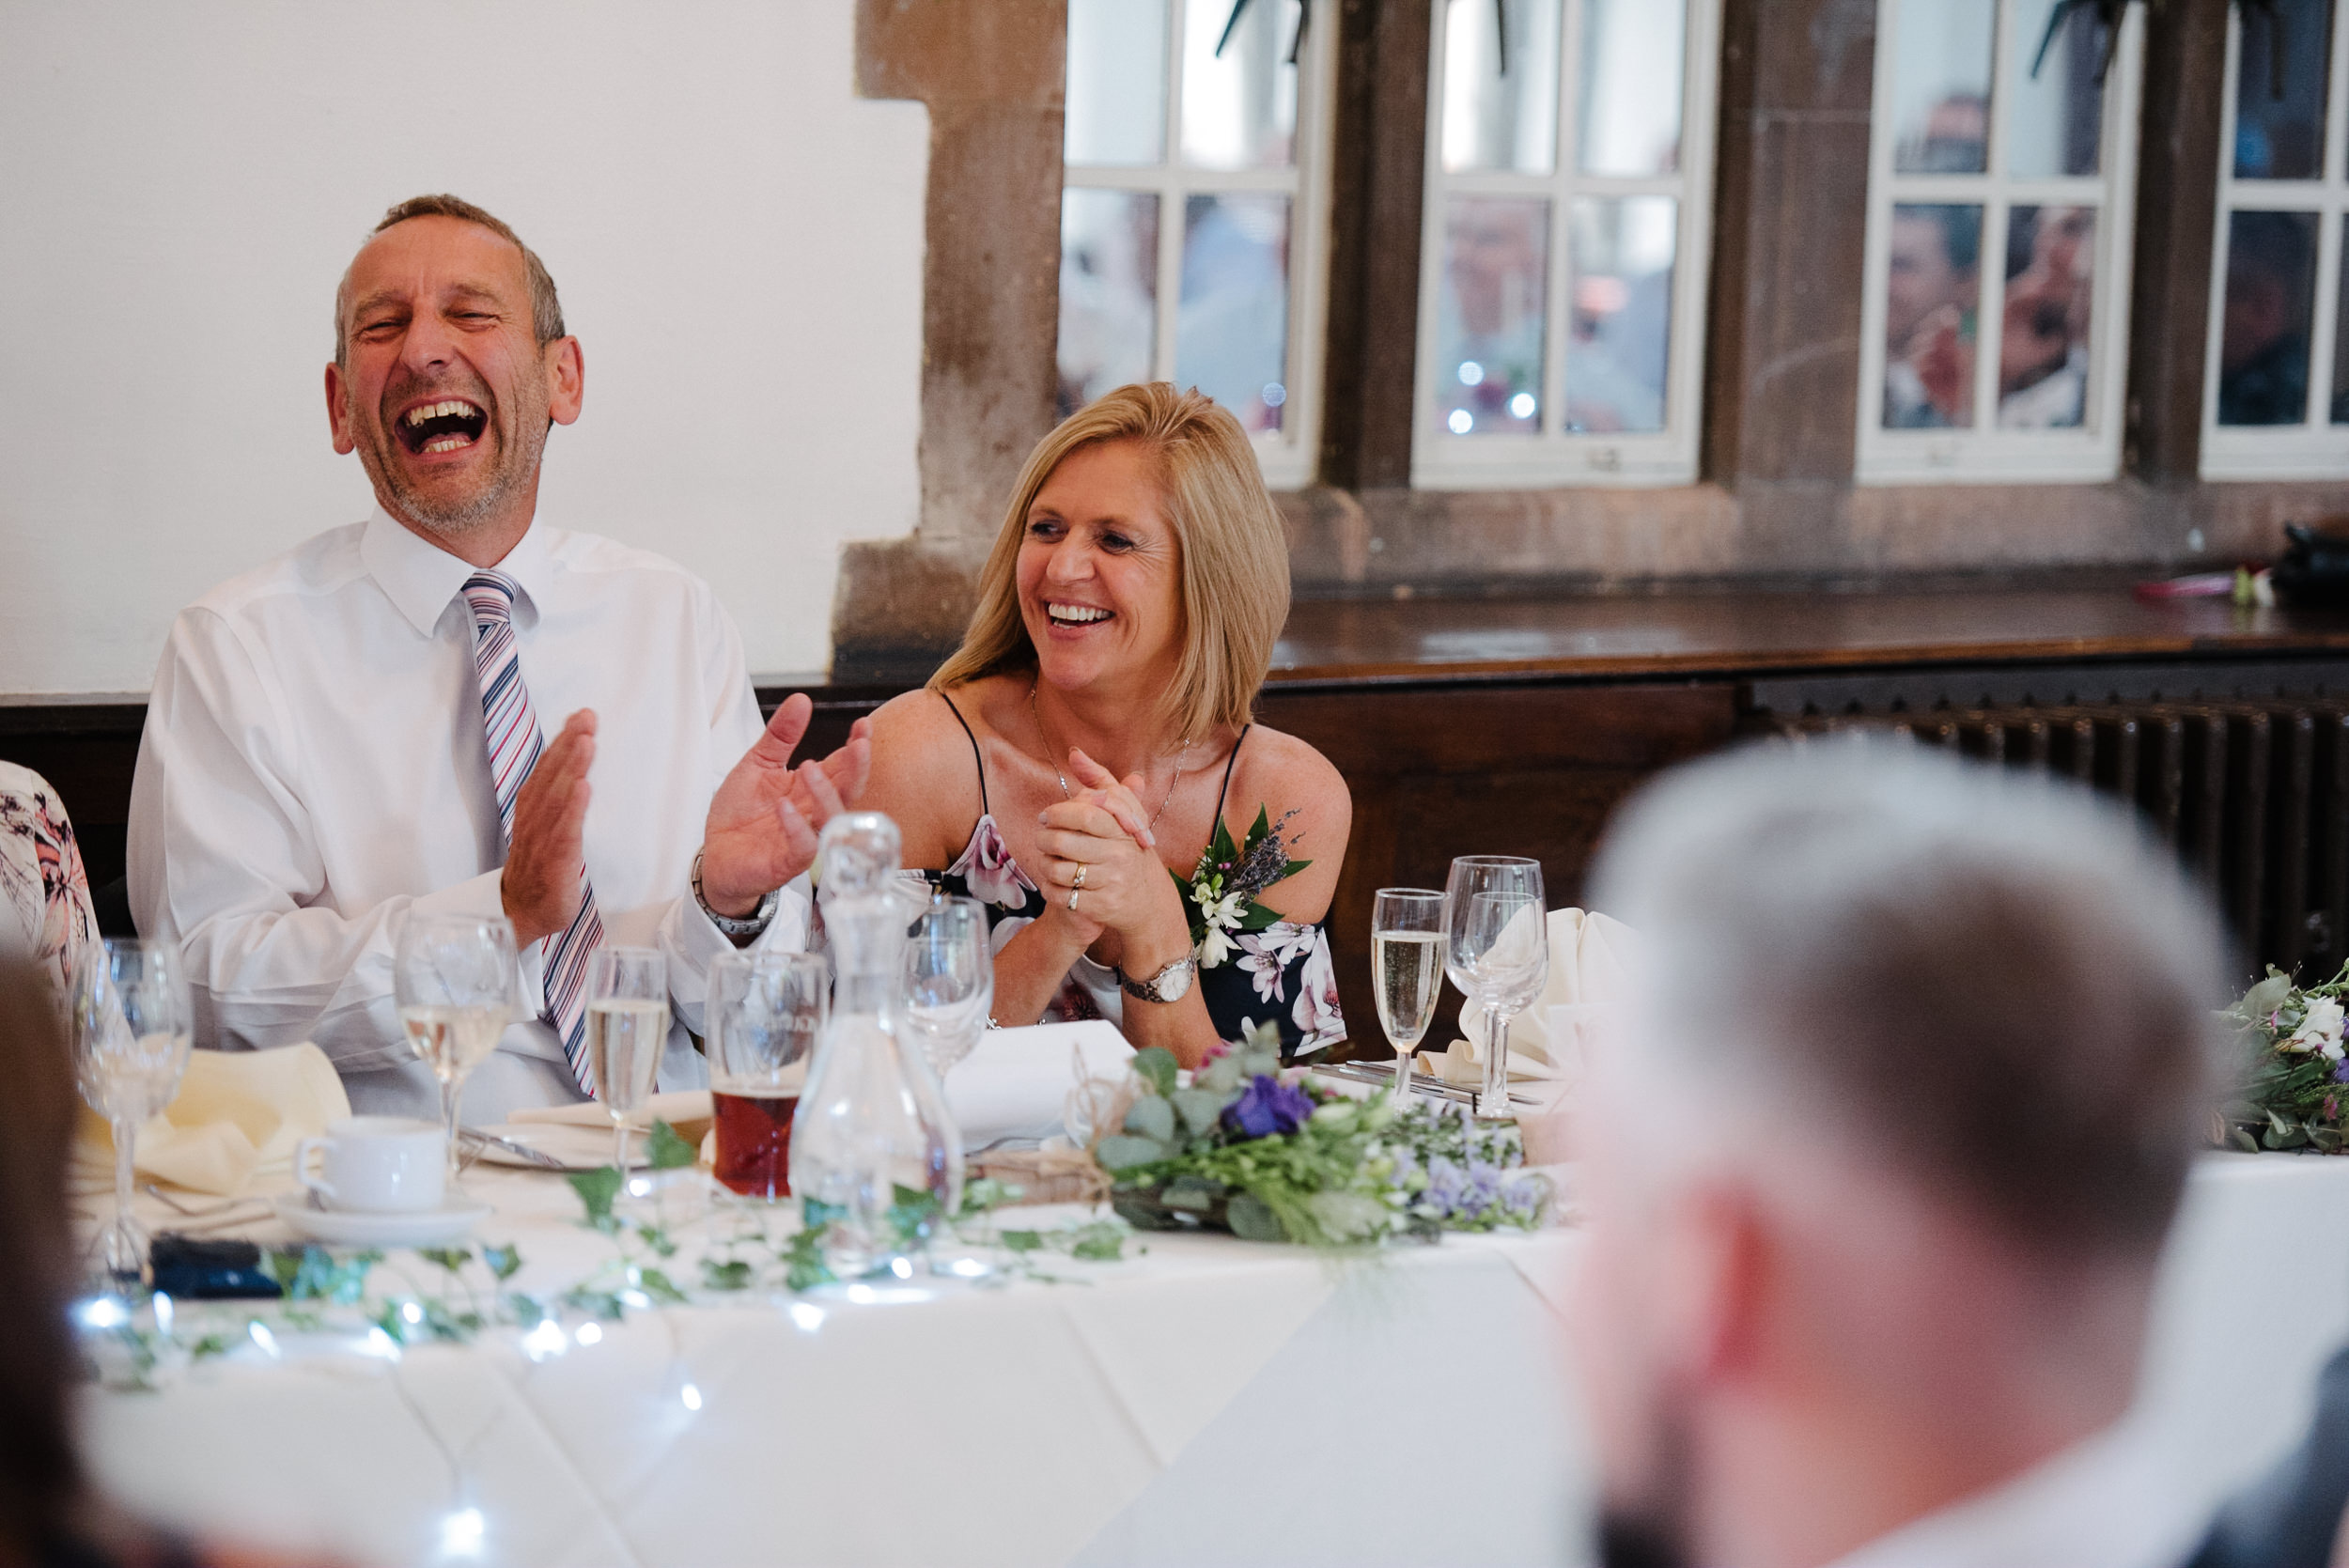 Brides mother laughing at the grooms speech